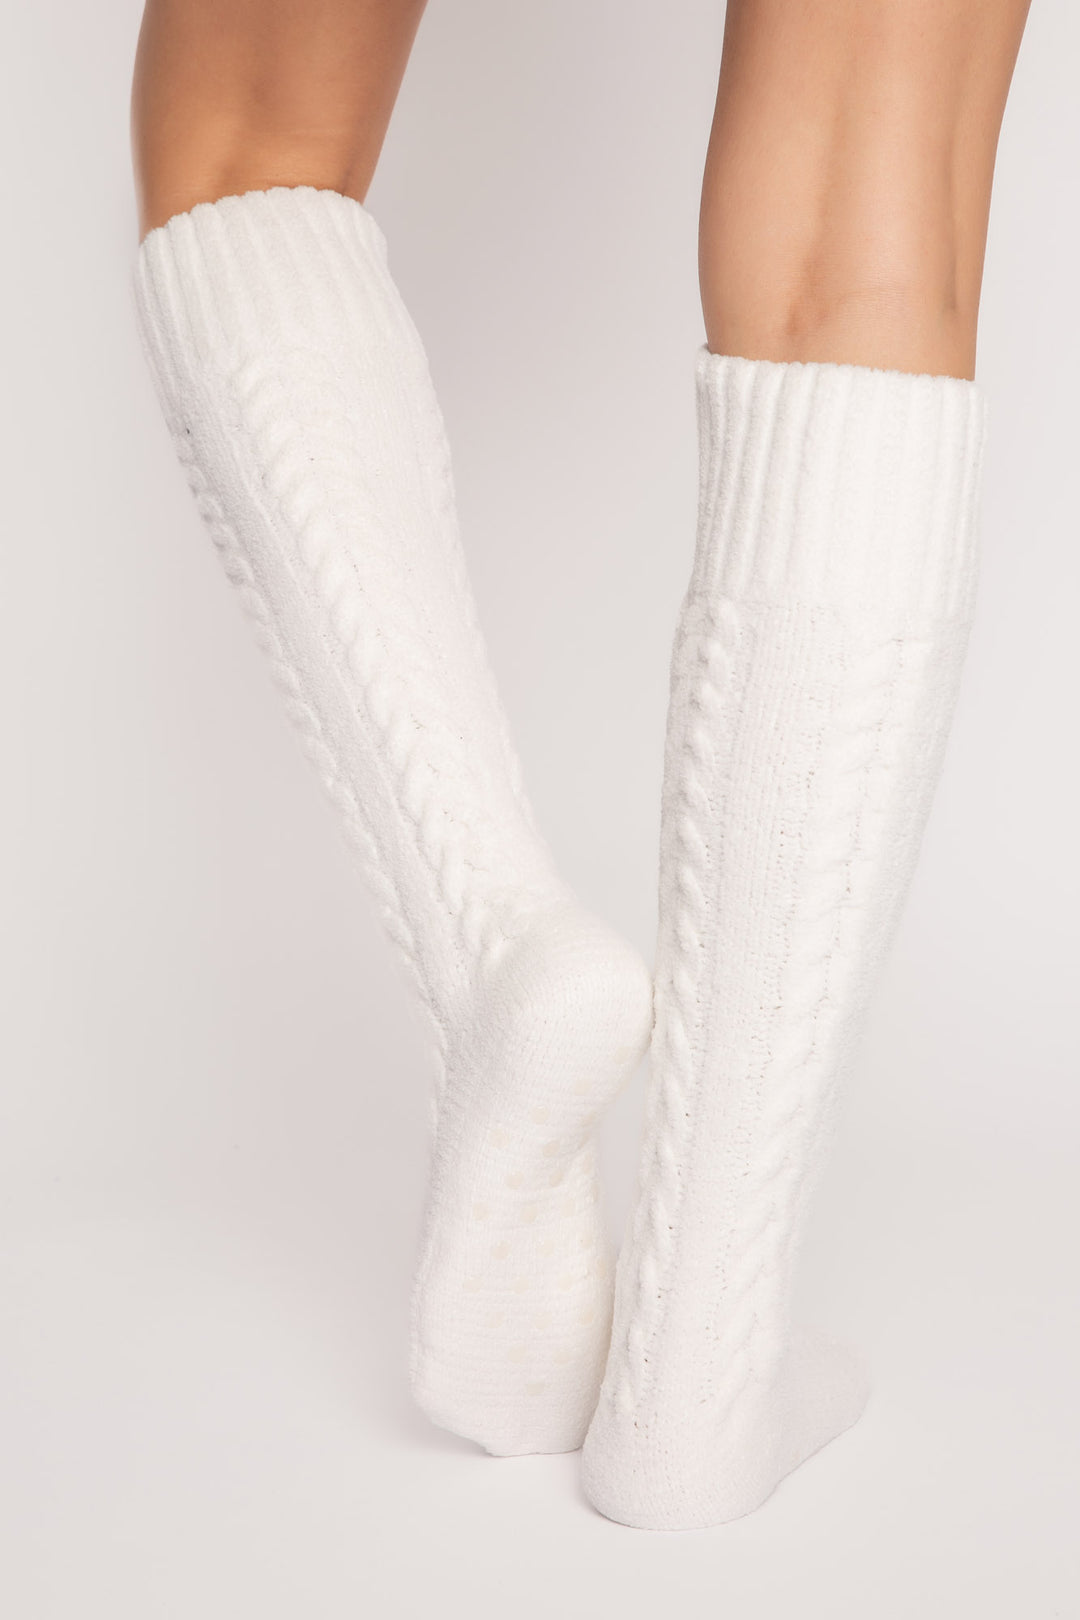 Cozy knee socks in ivory cable-textured chenille with bottom grippers for non-slip feet. (7231865520228)